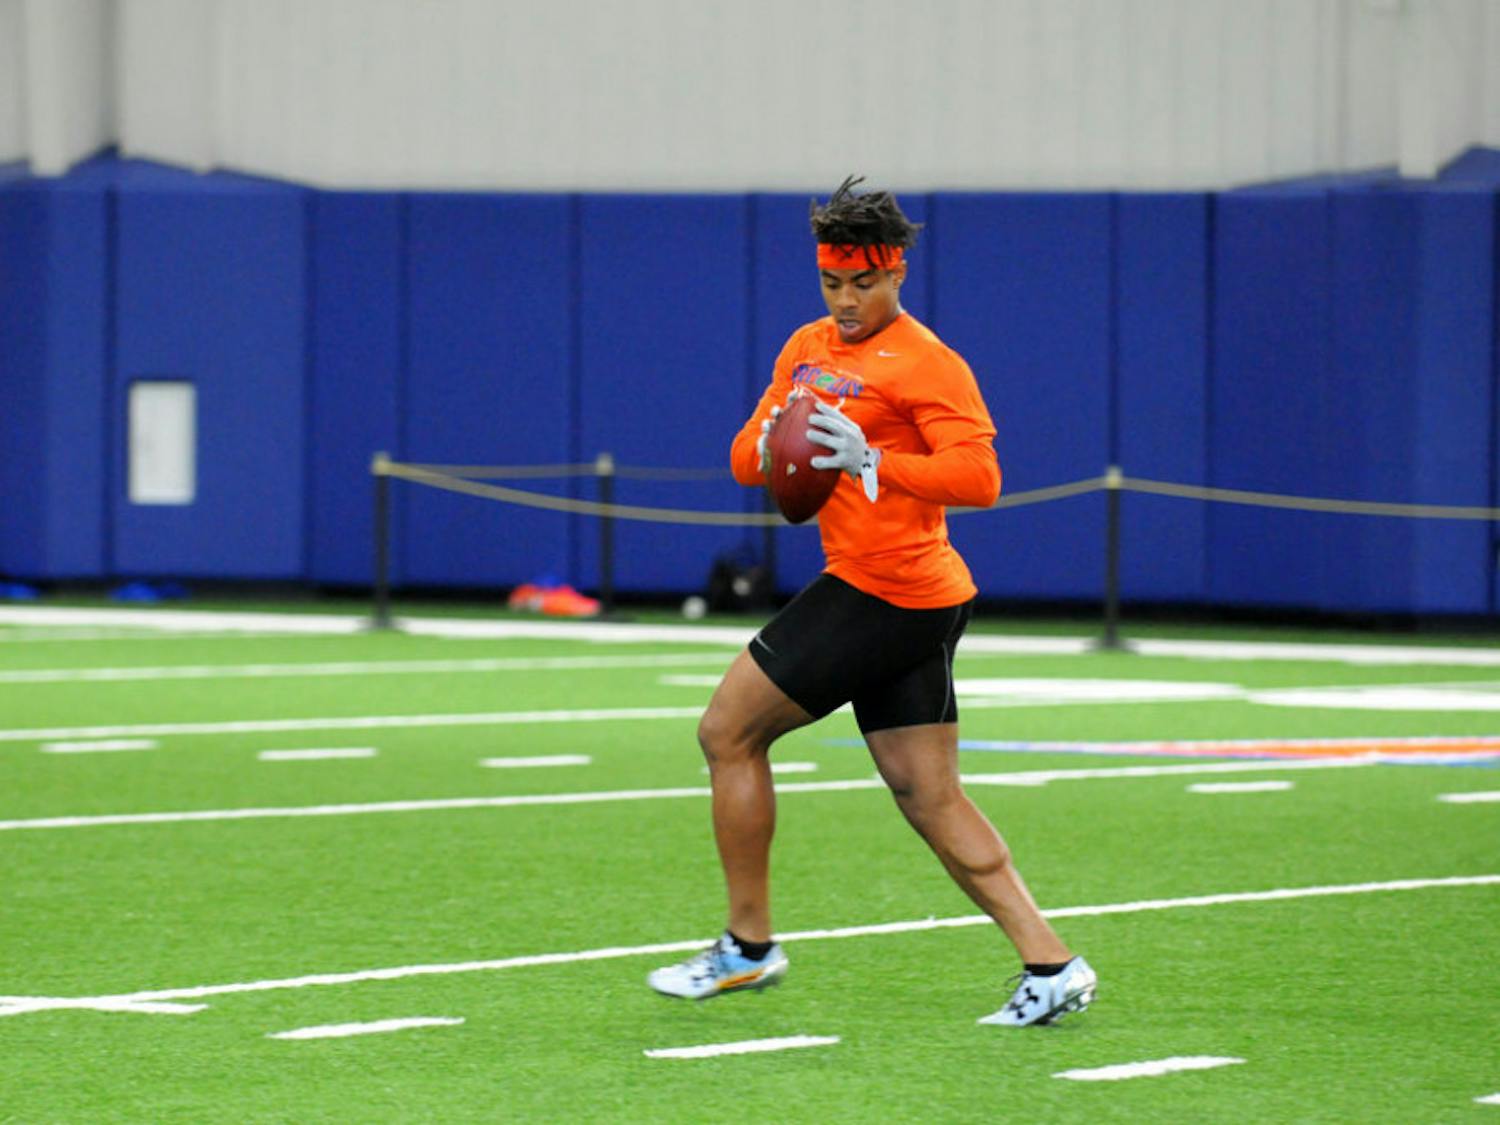 All-America cornerback Vernon Hargreaves III catches a pass during a drill as part of Florida's Pro Day on Tuesday inside UF's indoor practice facility.